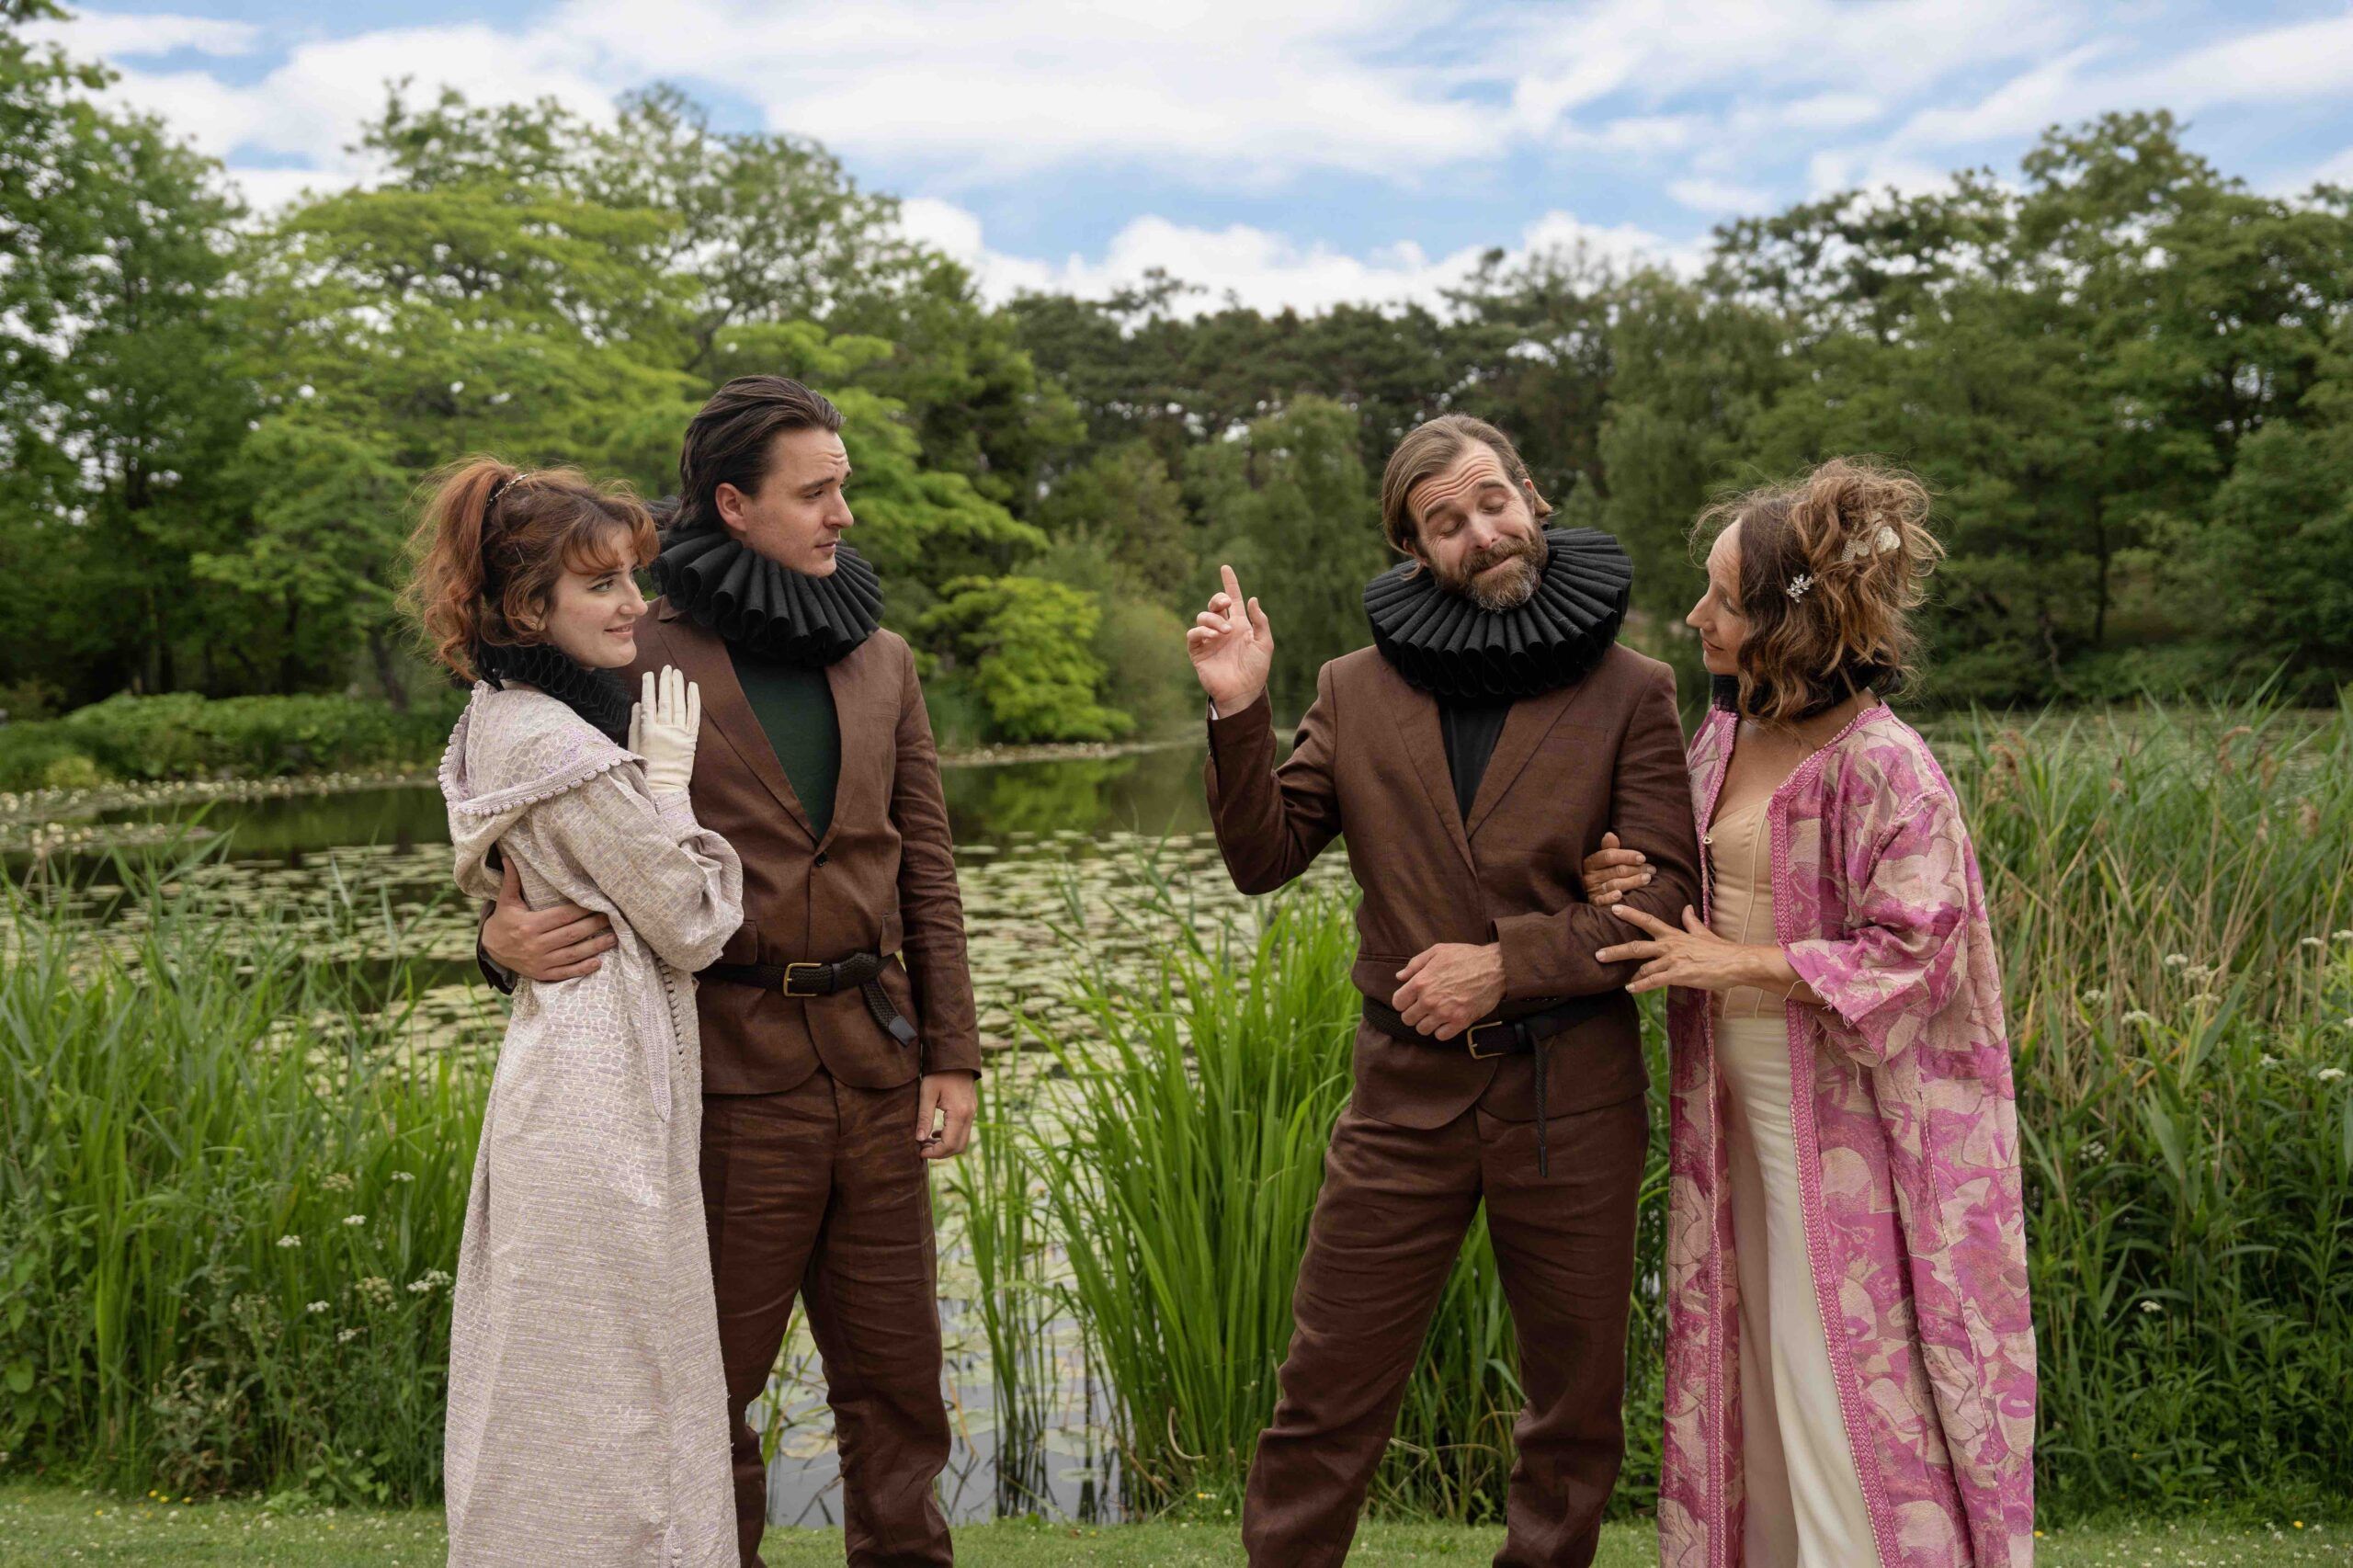 Watch Shakespeare’s ‘Much Ado About Nothing’ outdoors at the Botanical Garden